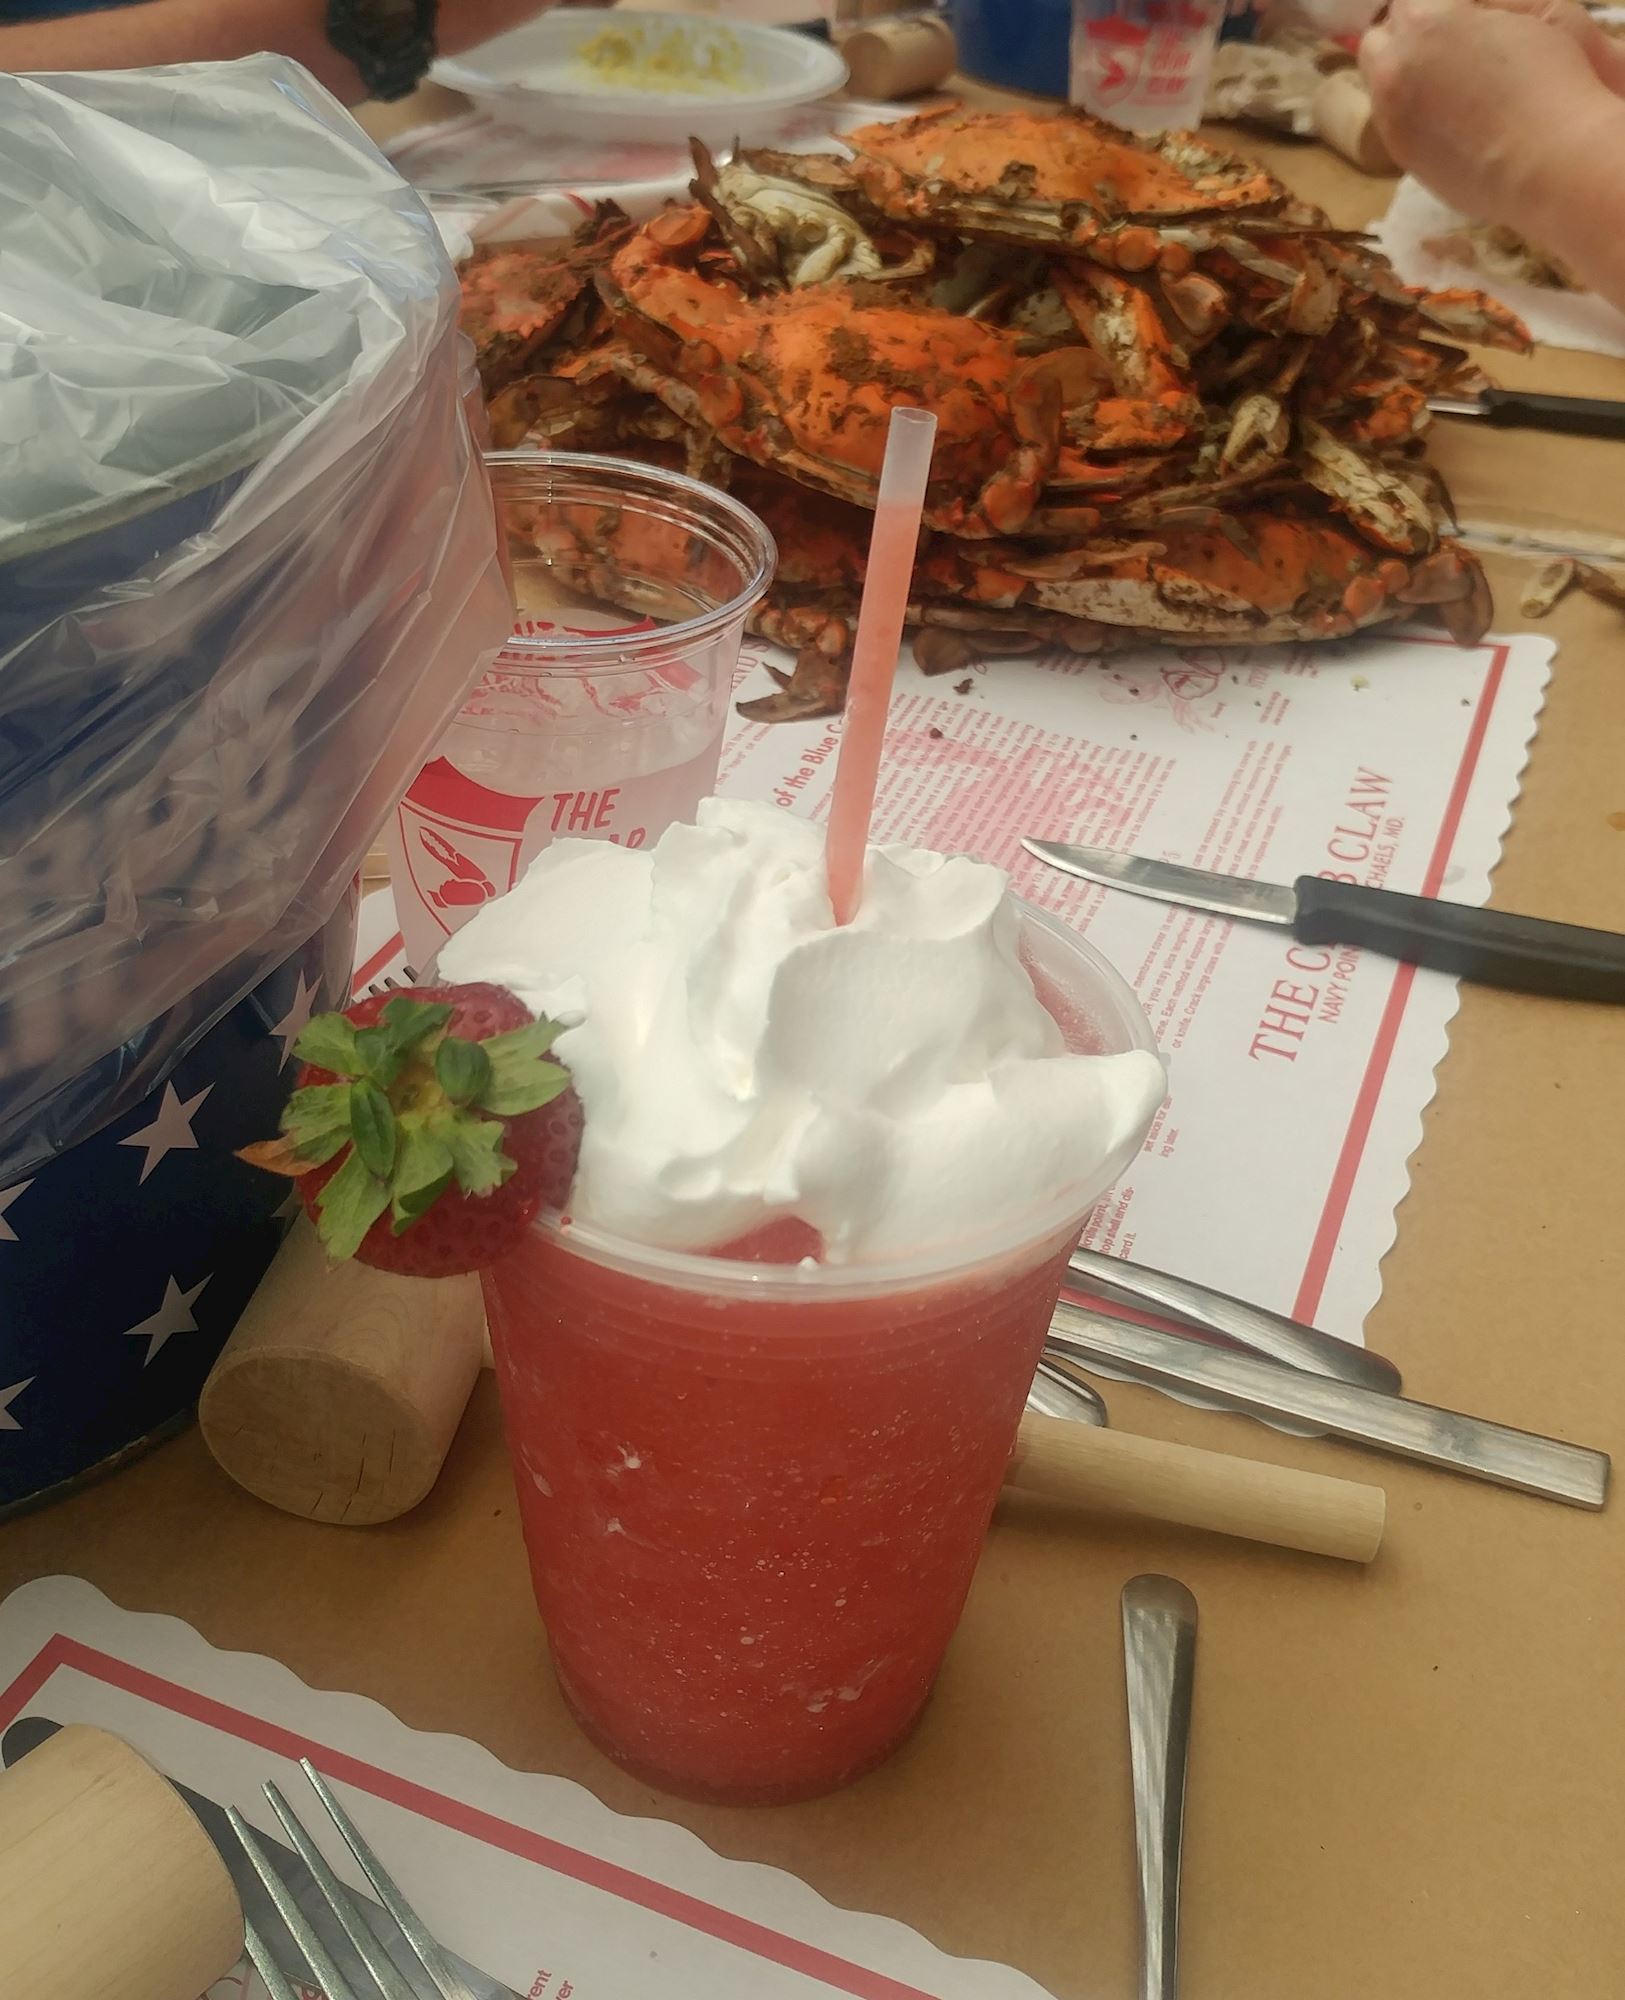 All you can eat "Steamed crabs"